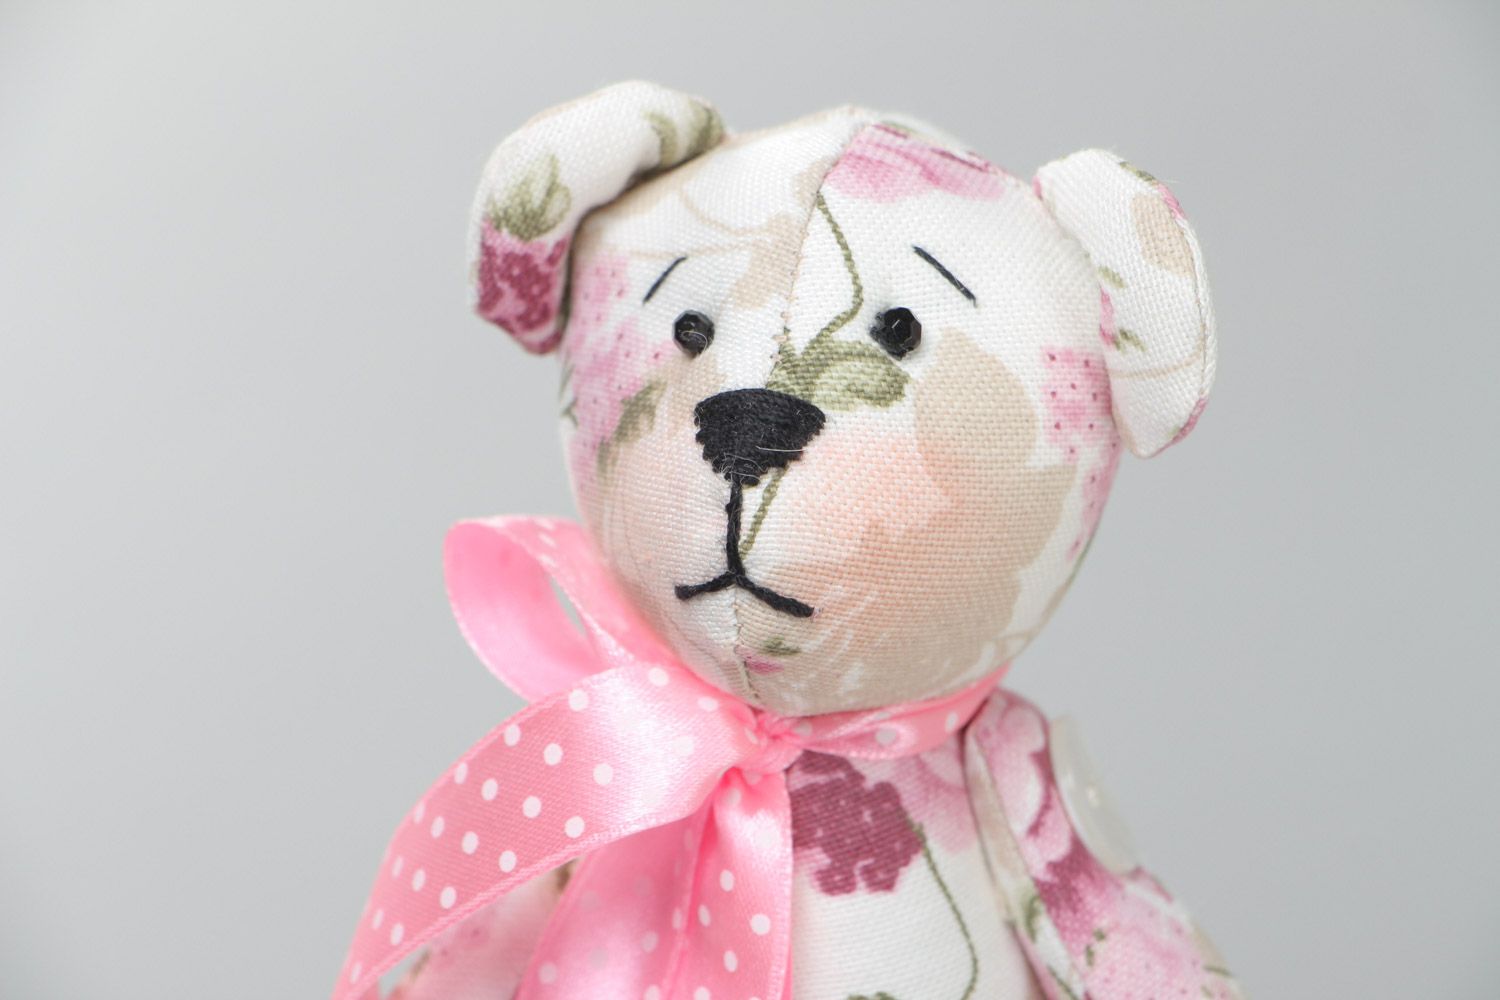 Handmade soft toy bear sewn of cotton fabric with light floral print photo 3